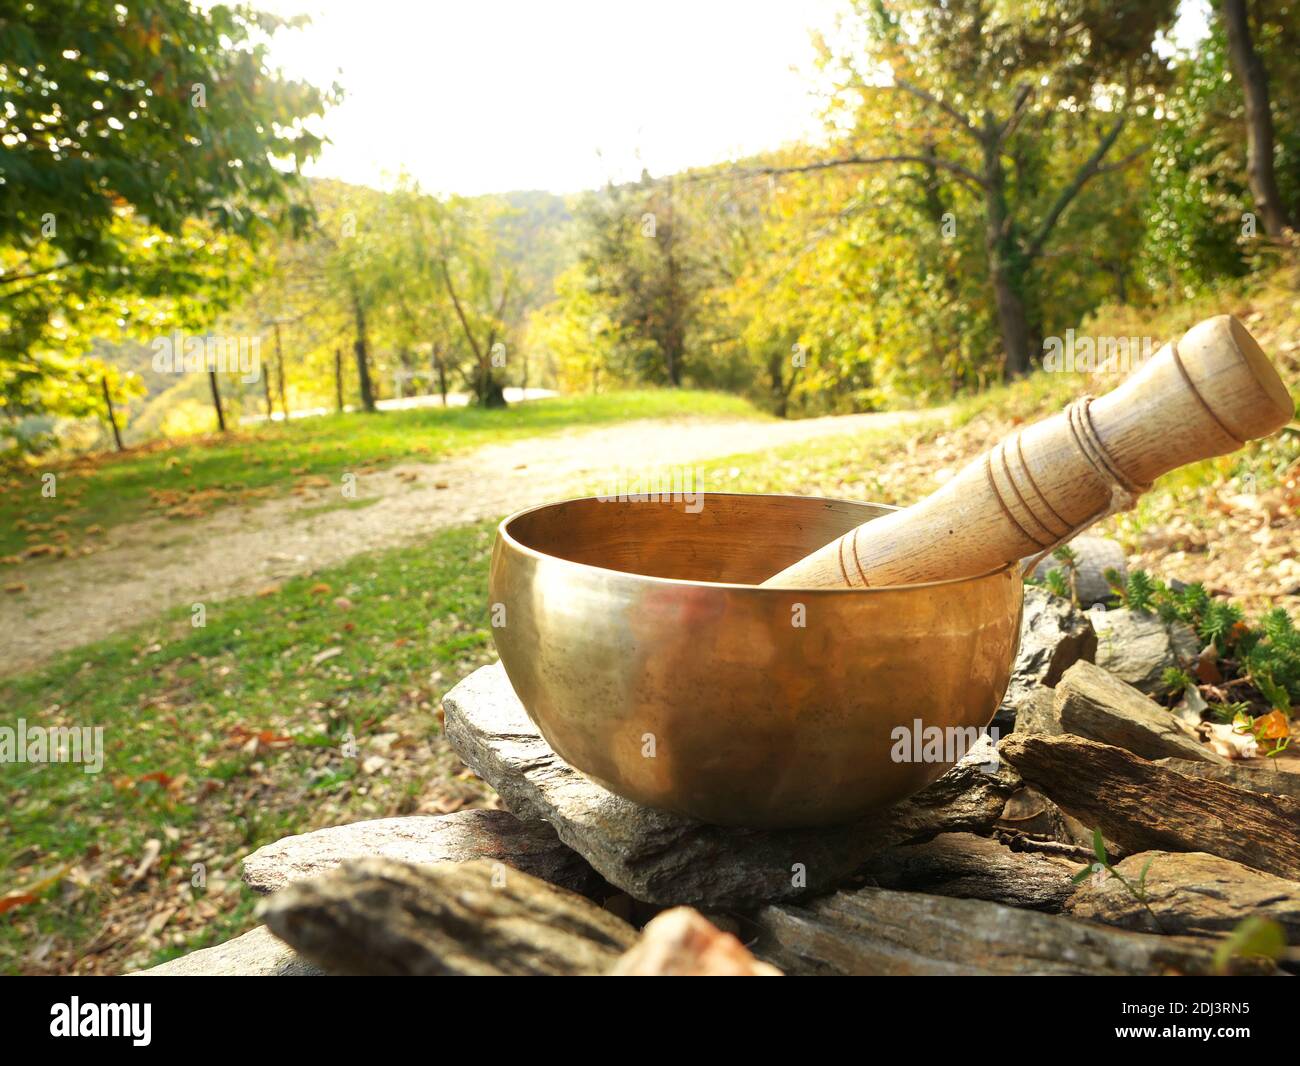 Singing bowl placed on pebbles with nature in the background Stock Photo